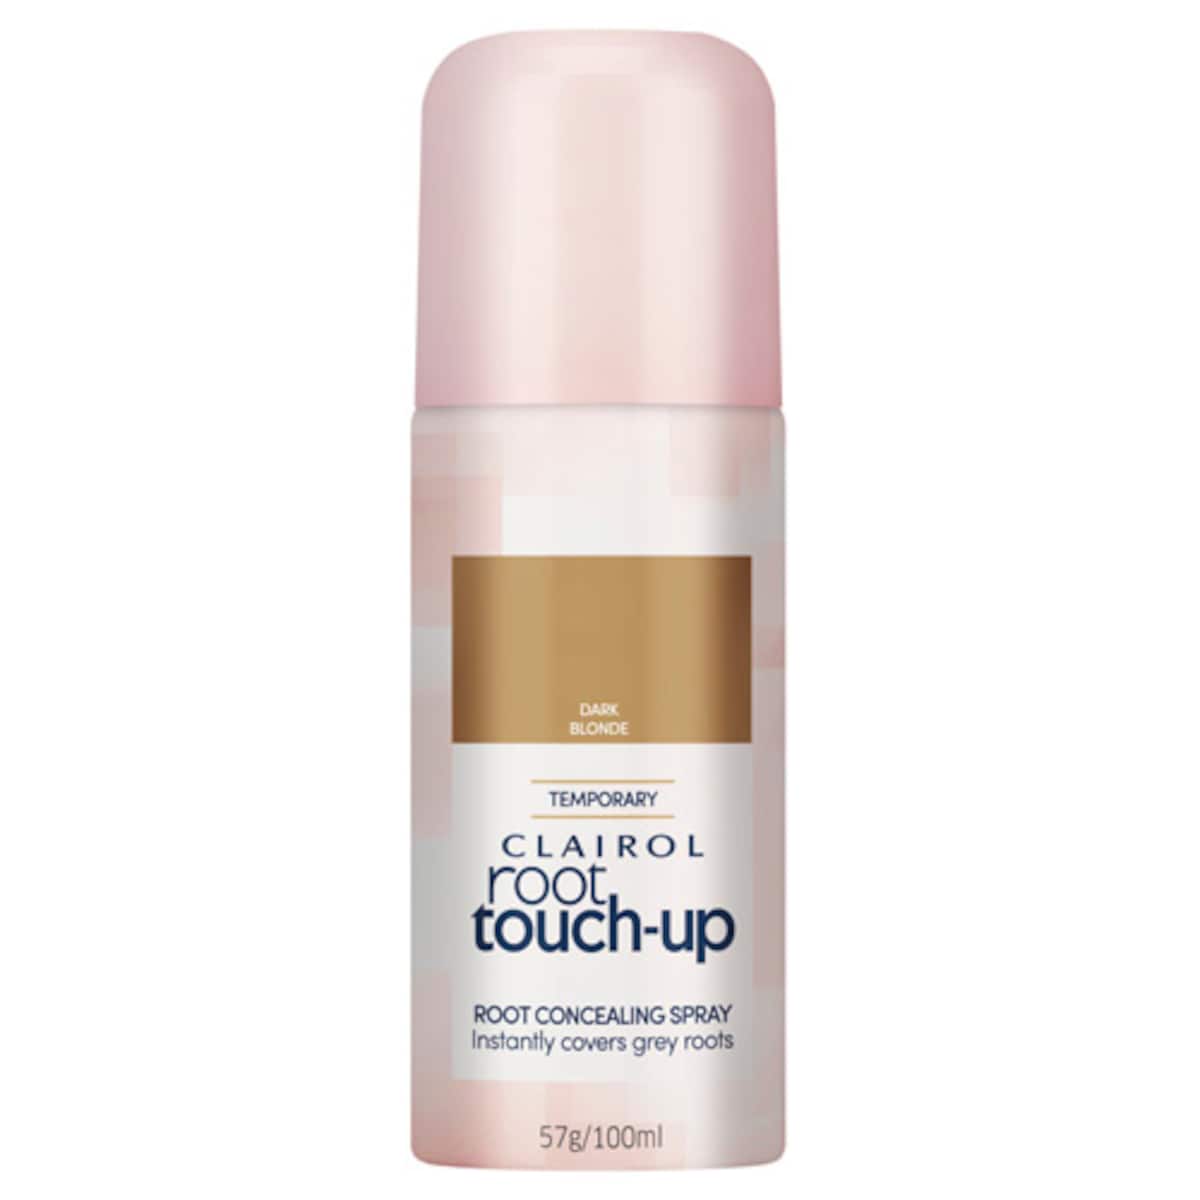 Clairol Root Touch Up Root Concealing Spray Dark Blonde 100ml